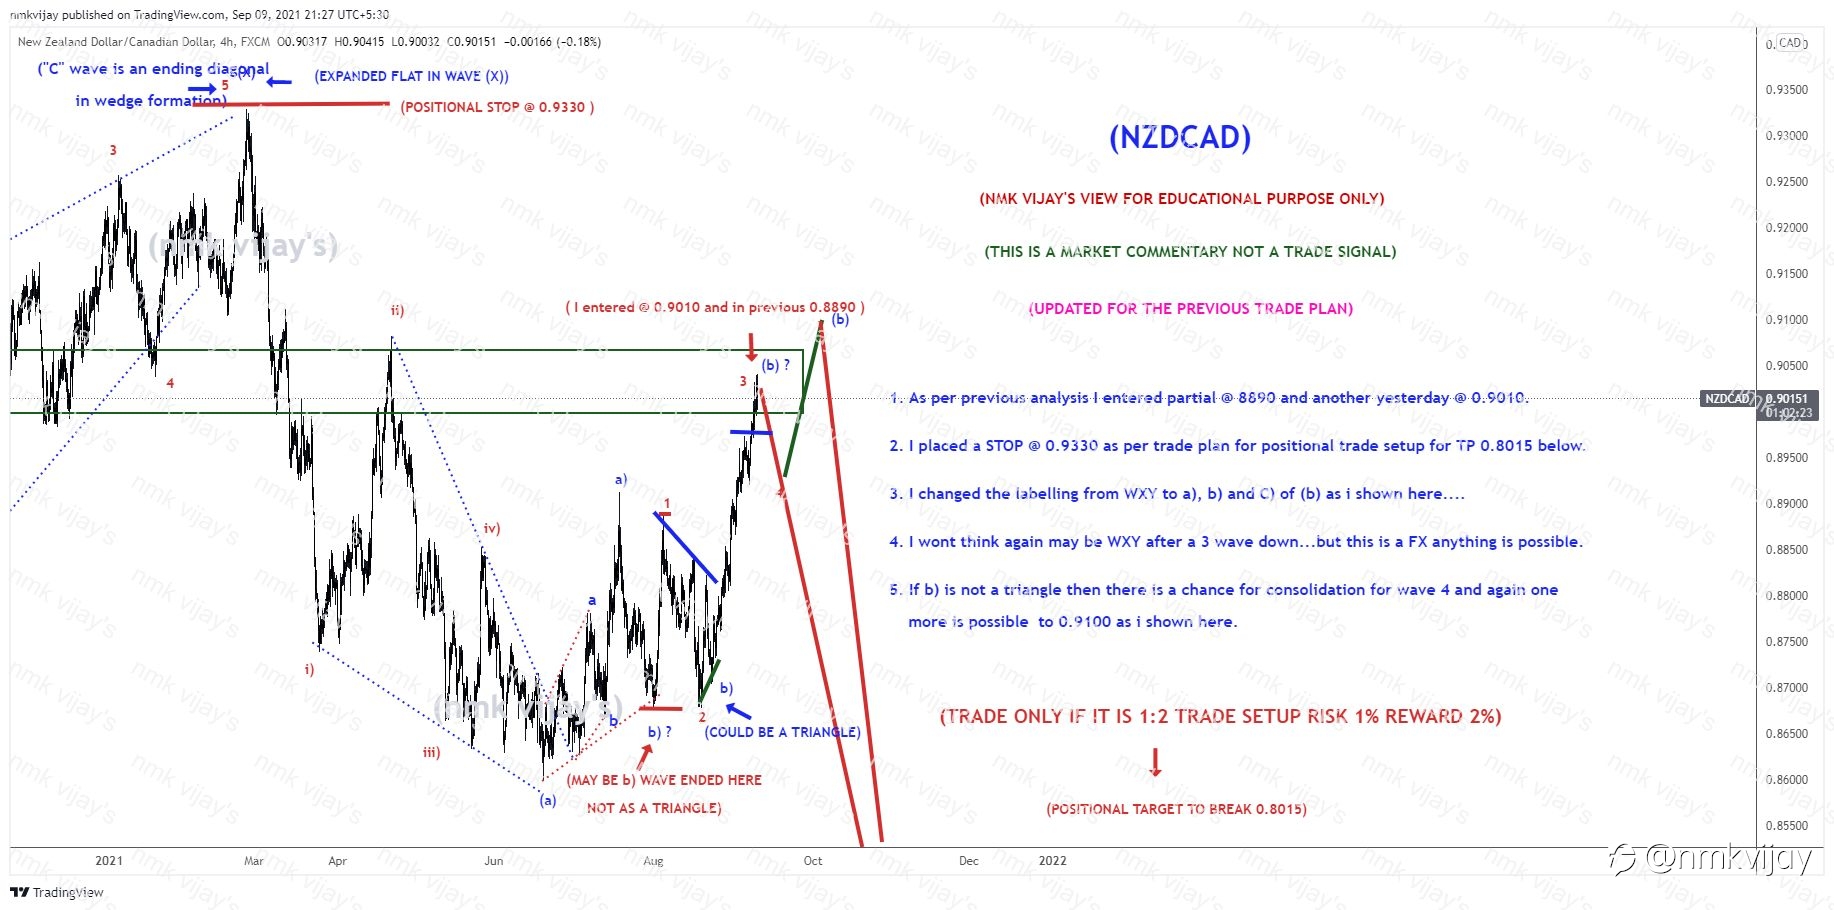 NZDCAD-Whether wave (b) completed or still one more high?